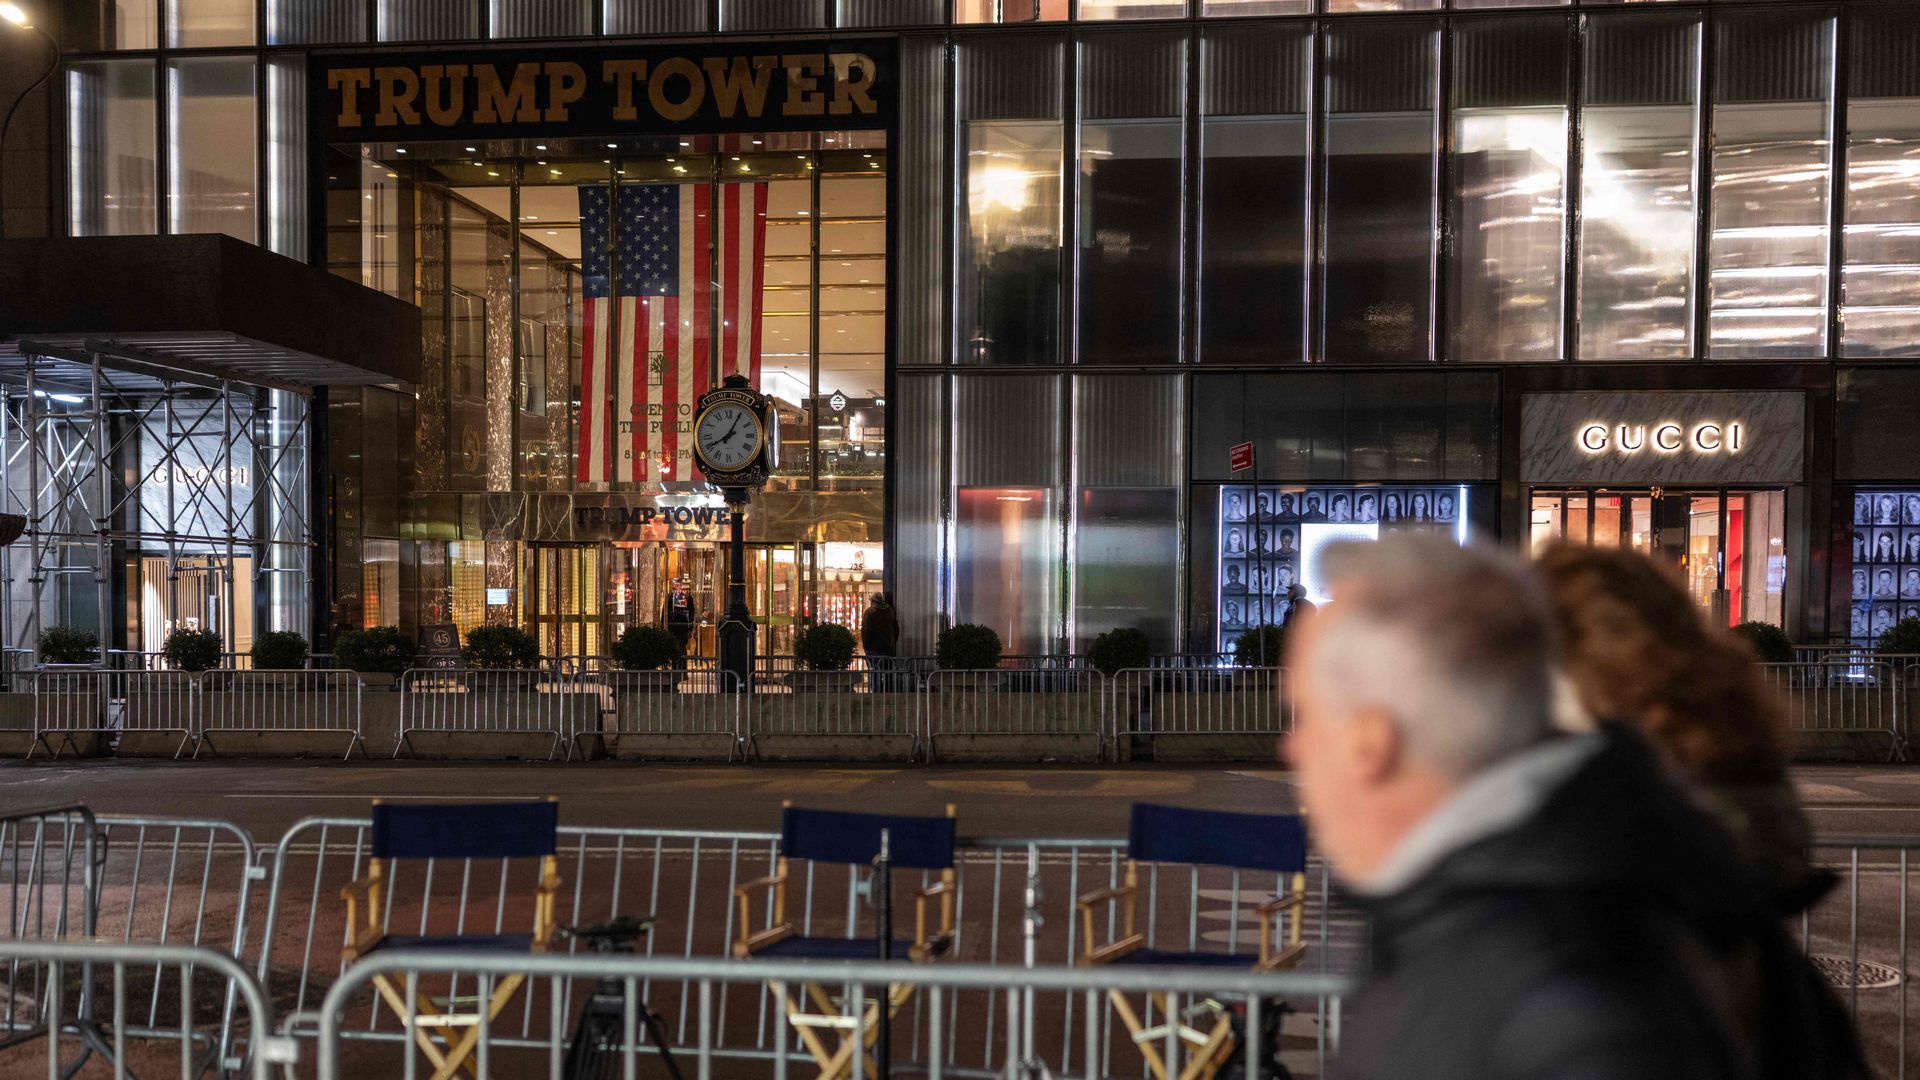 People walk past media pens setup across the street from Trump Tower in New York, New York on April 2.